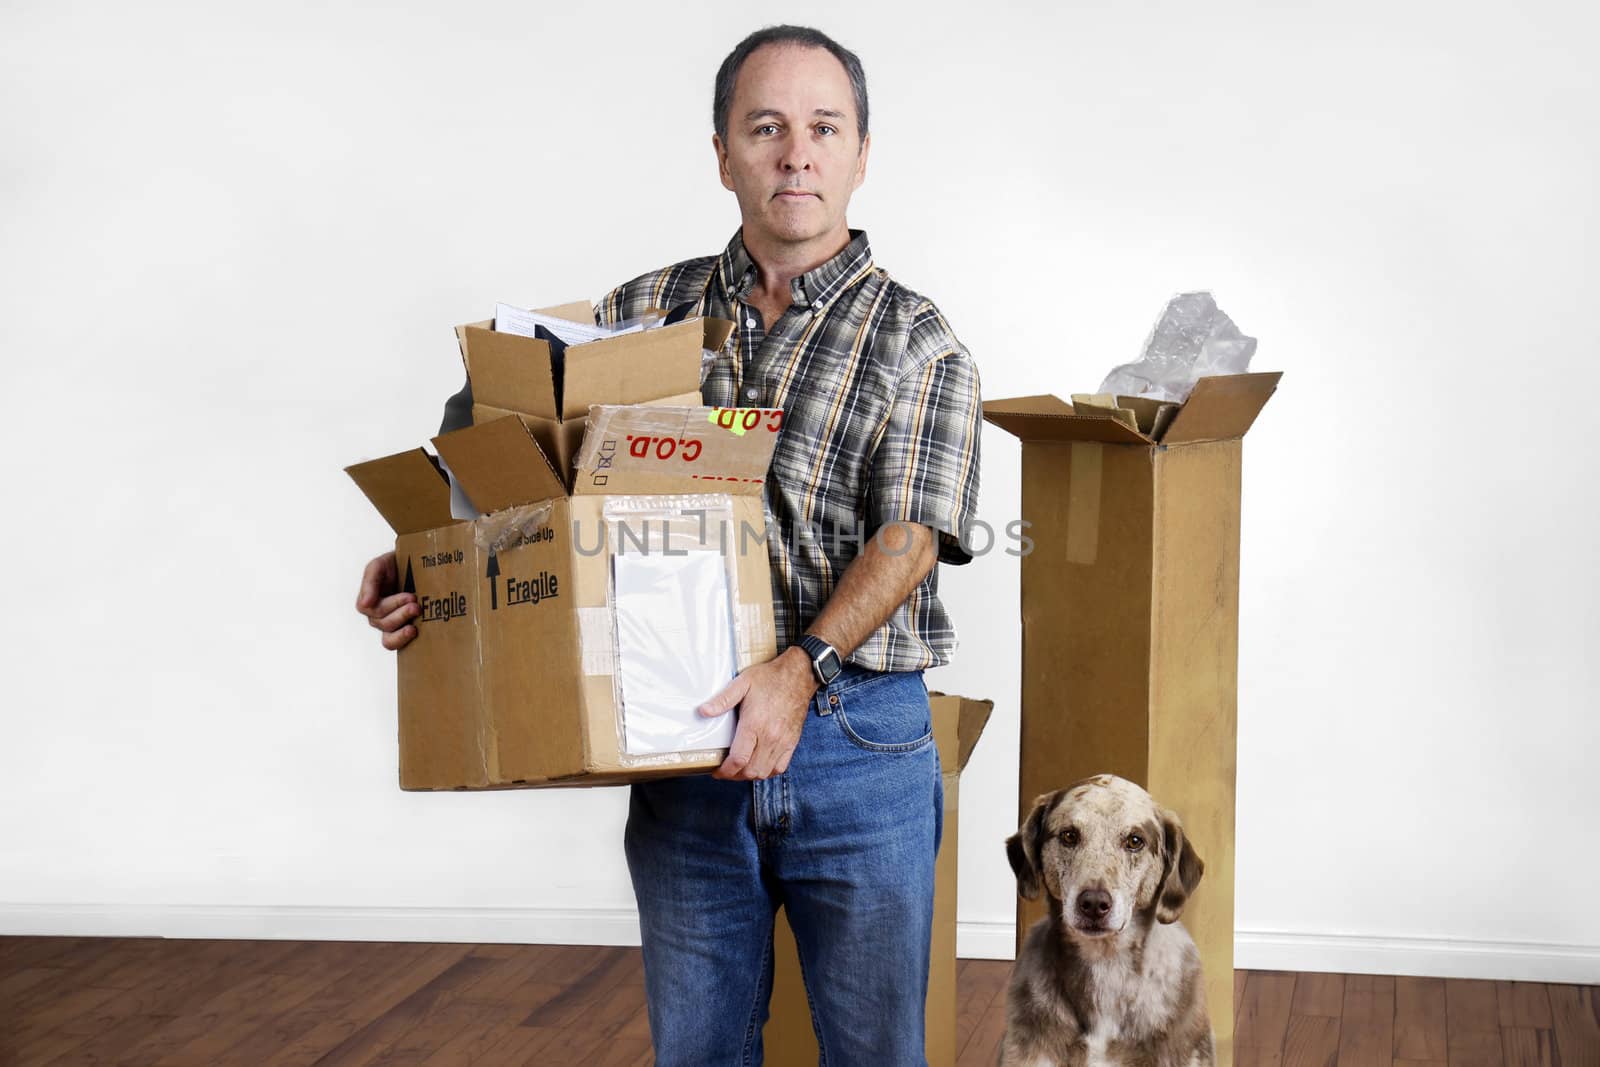 MIddle age man and dog moving out holding boxes looking sad in empty bare room.